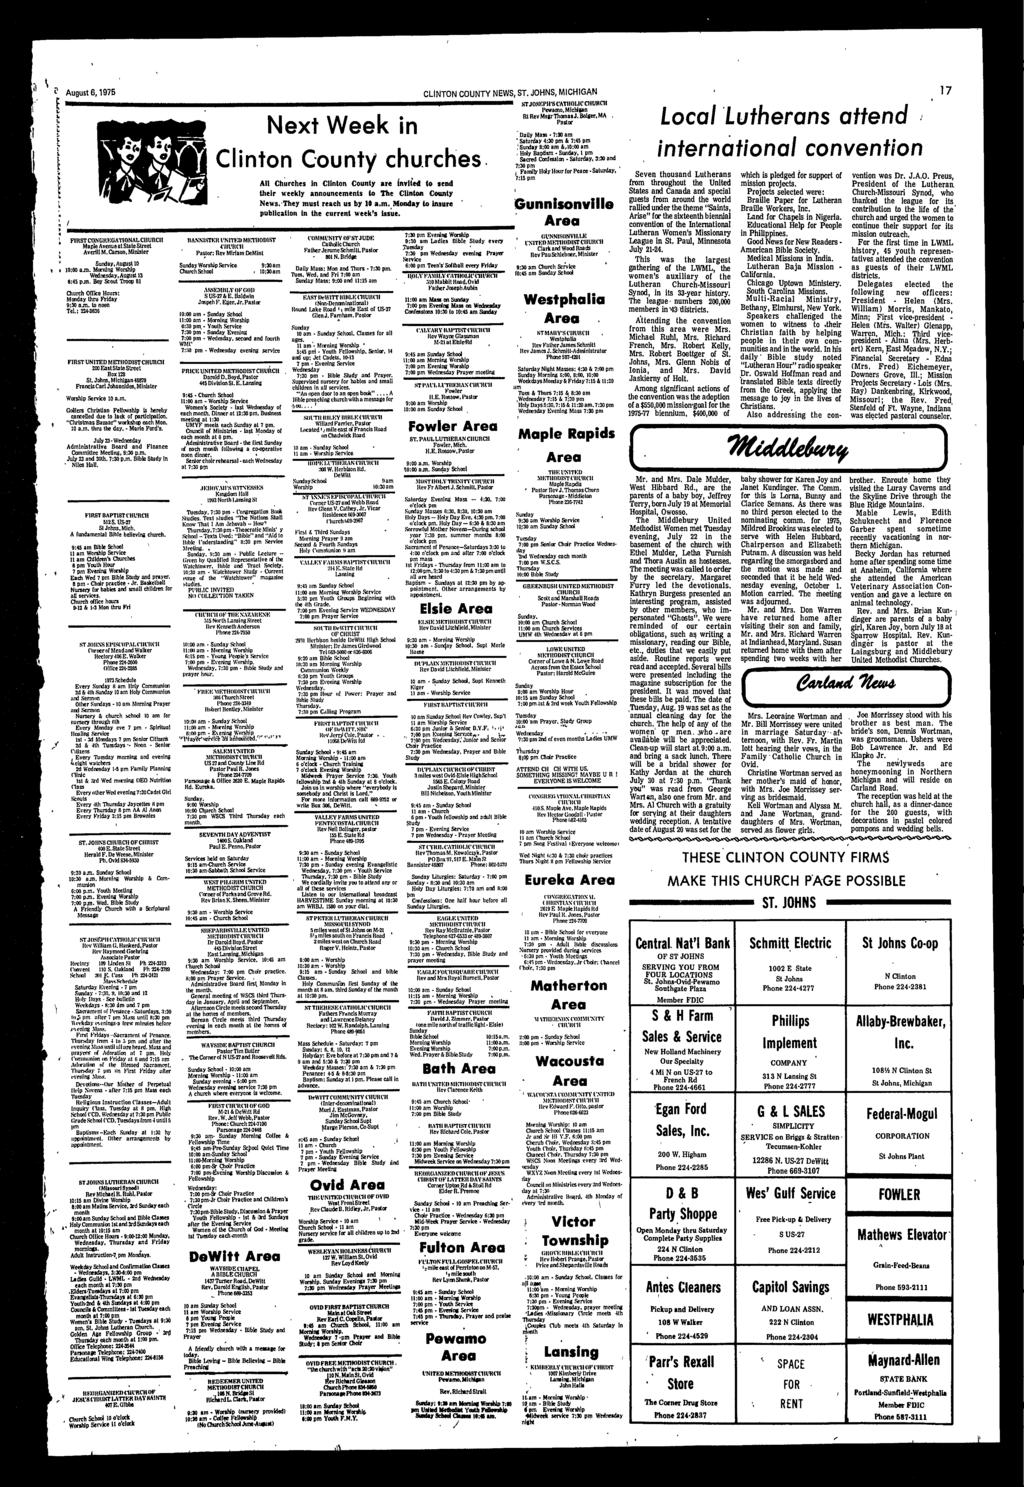 t ; / ' v August,1975 CLINTON COUNTY NEWS, ST. JOHNS, MICHIGAN 17 FIHSTCONGHKGATIONAL CHURCH Maple Avenue at State Street Averll M. Corson, Mnster Sunday,AugusllO t 10:00 am.